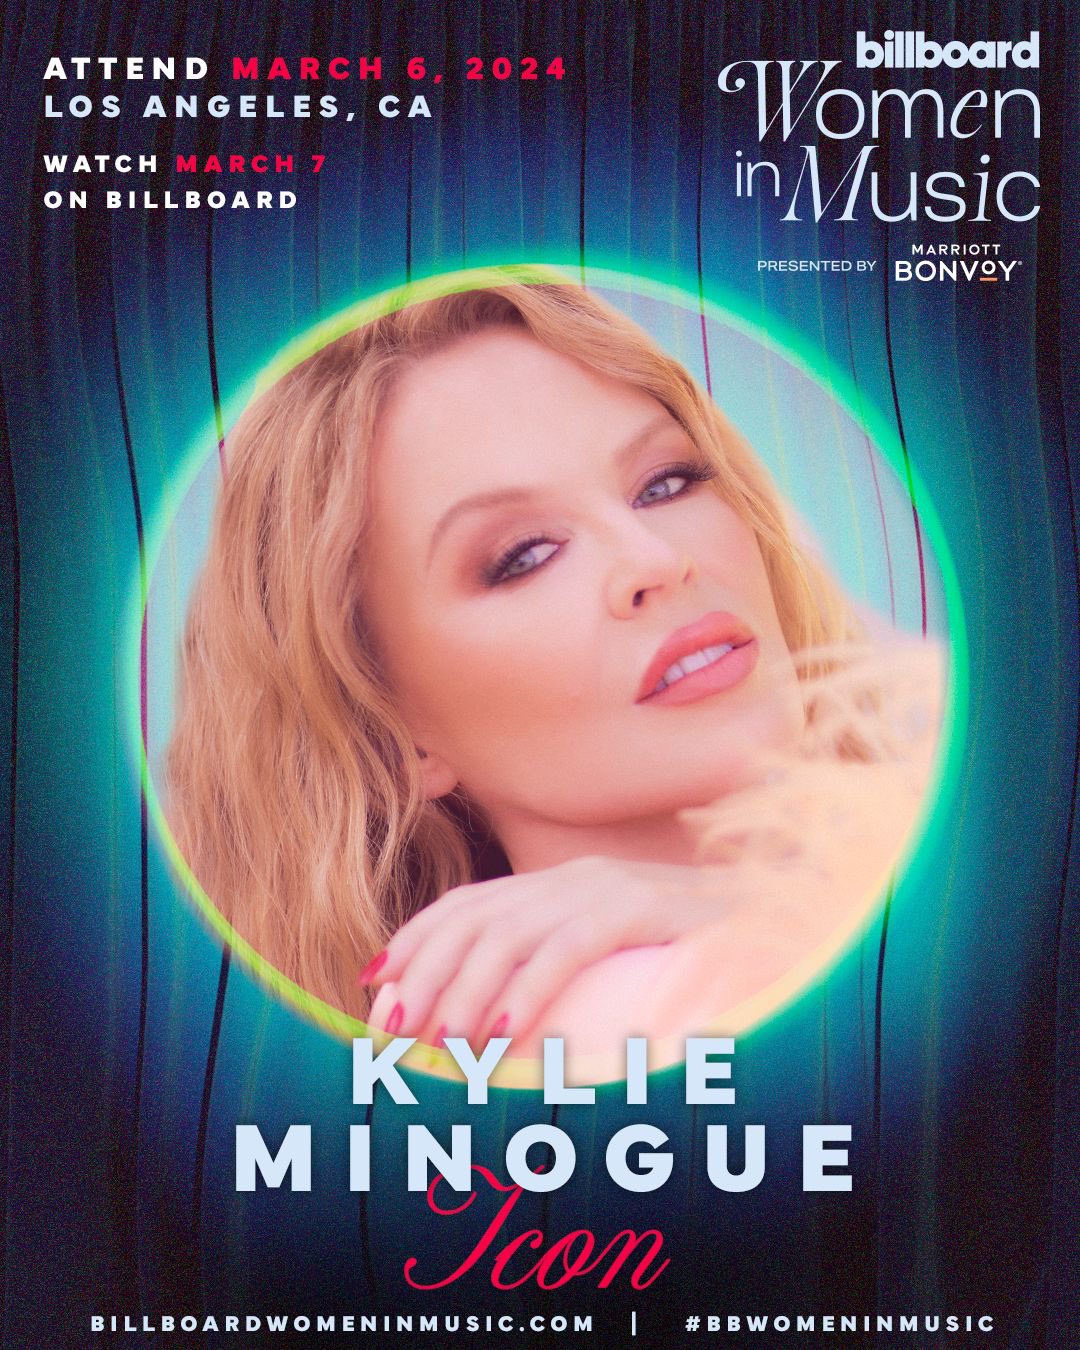 US Kylie Minogue to receive Icon Award at Billboards 2024 Women in